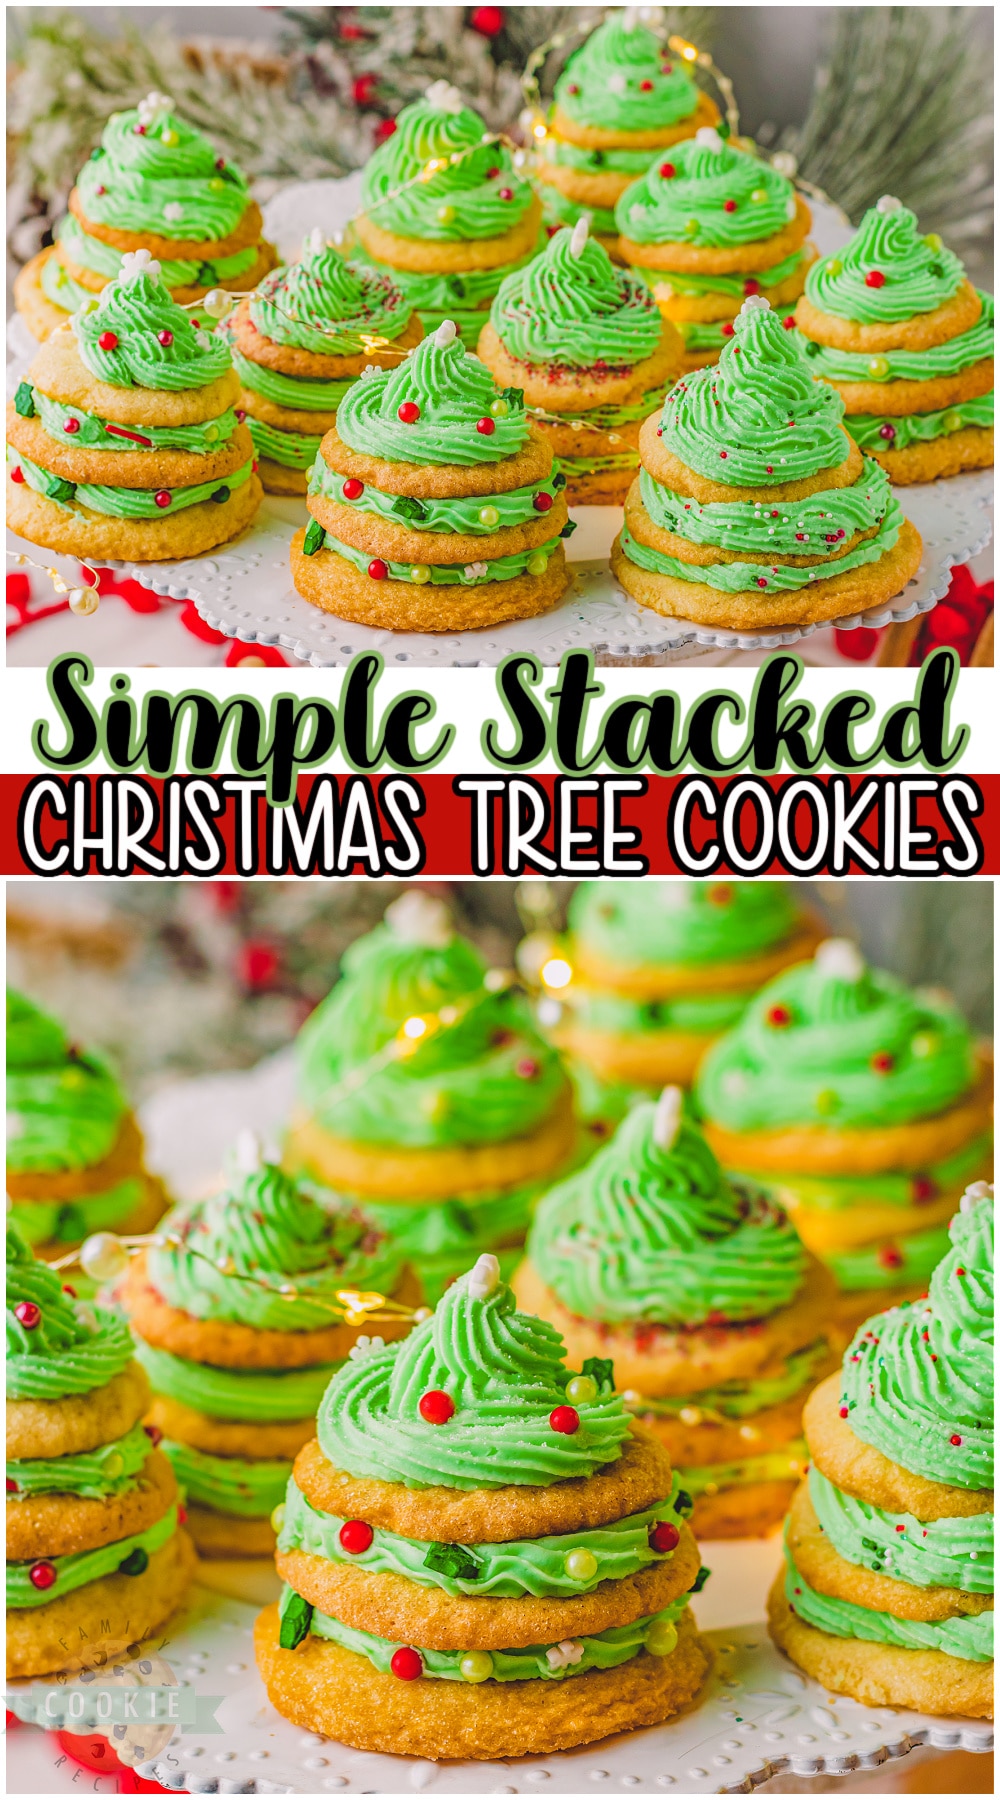 Fun & festive Christmas Tree Cookies are 3D Christmas trees in cookie form! Stacked layers of soft sugar cookies and green frosting, complete with sprinkles for ornaments complete the look of these cute holiday trees. 